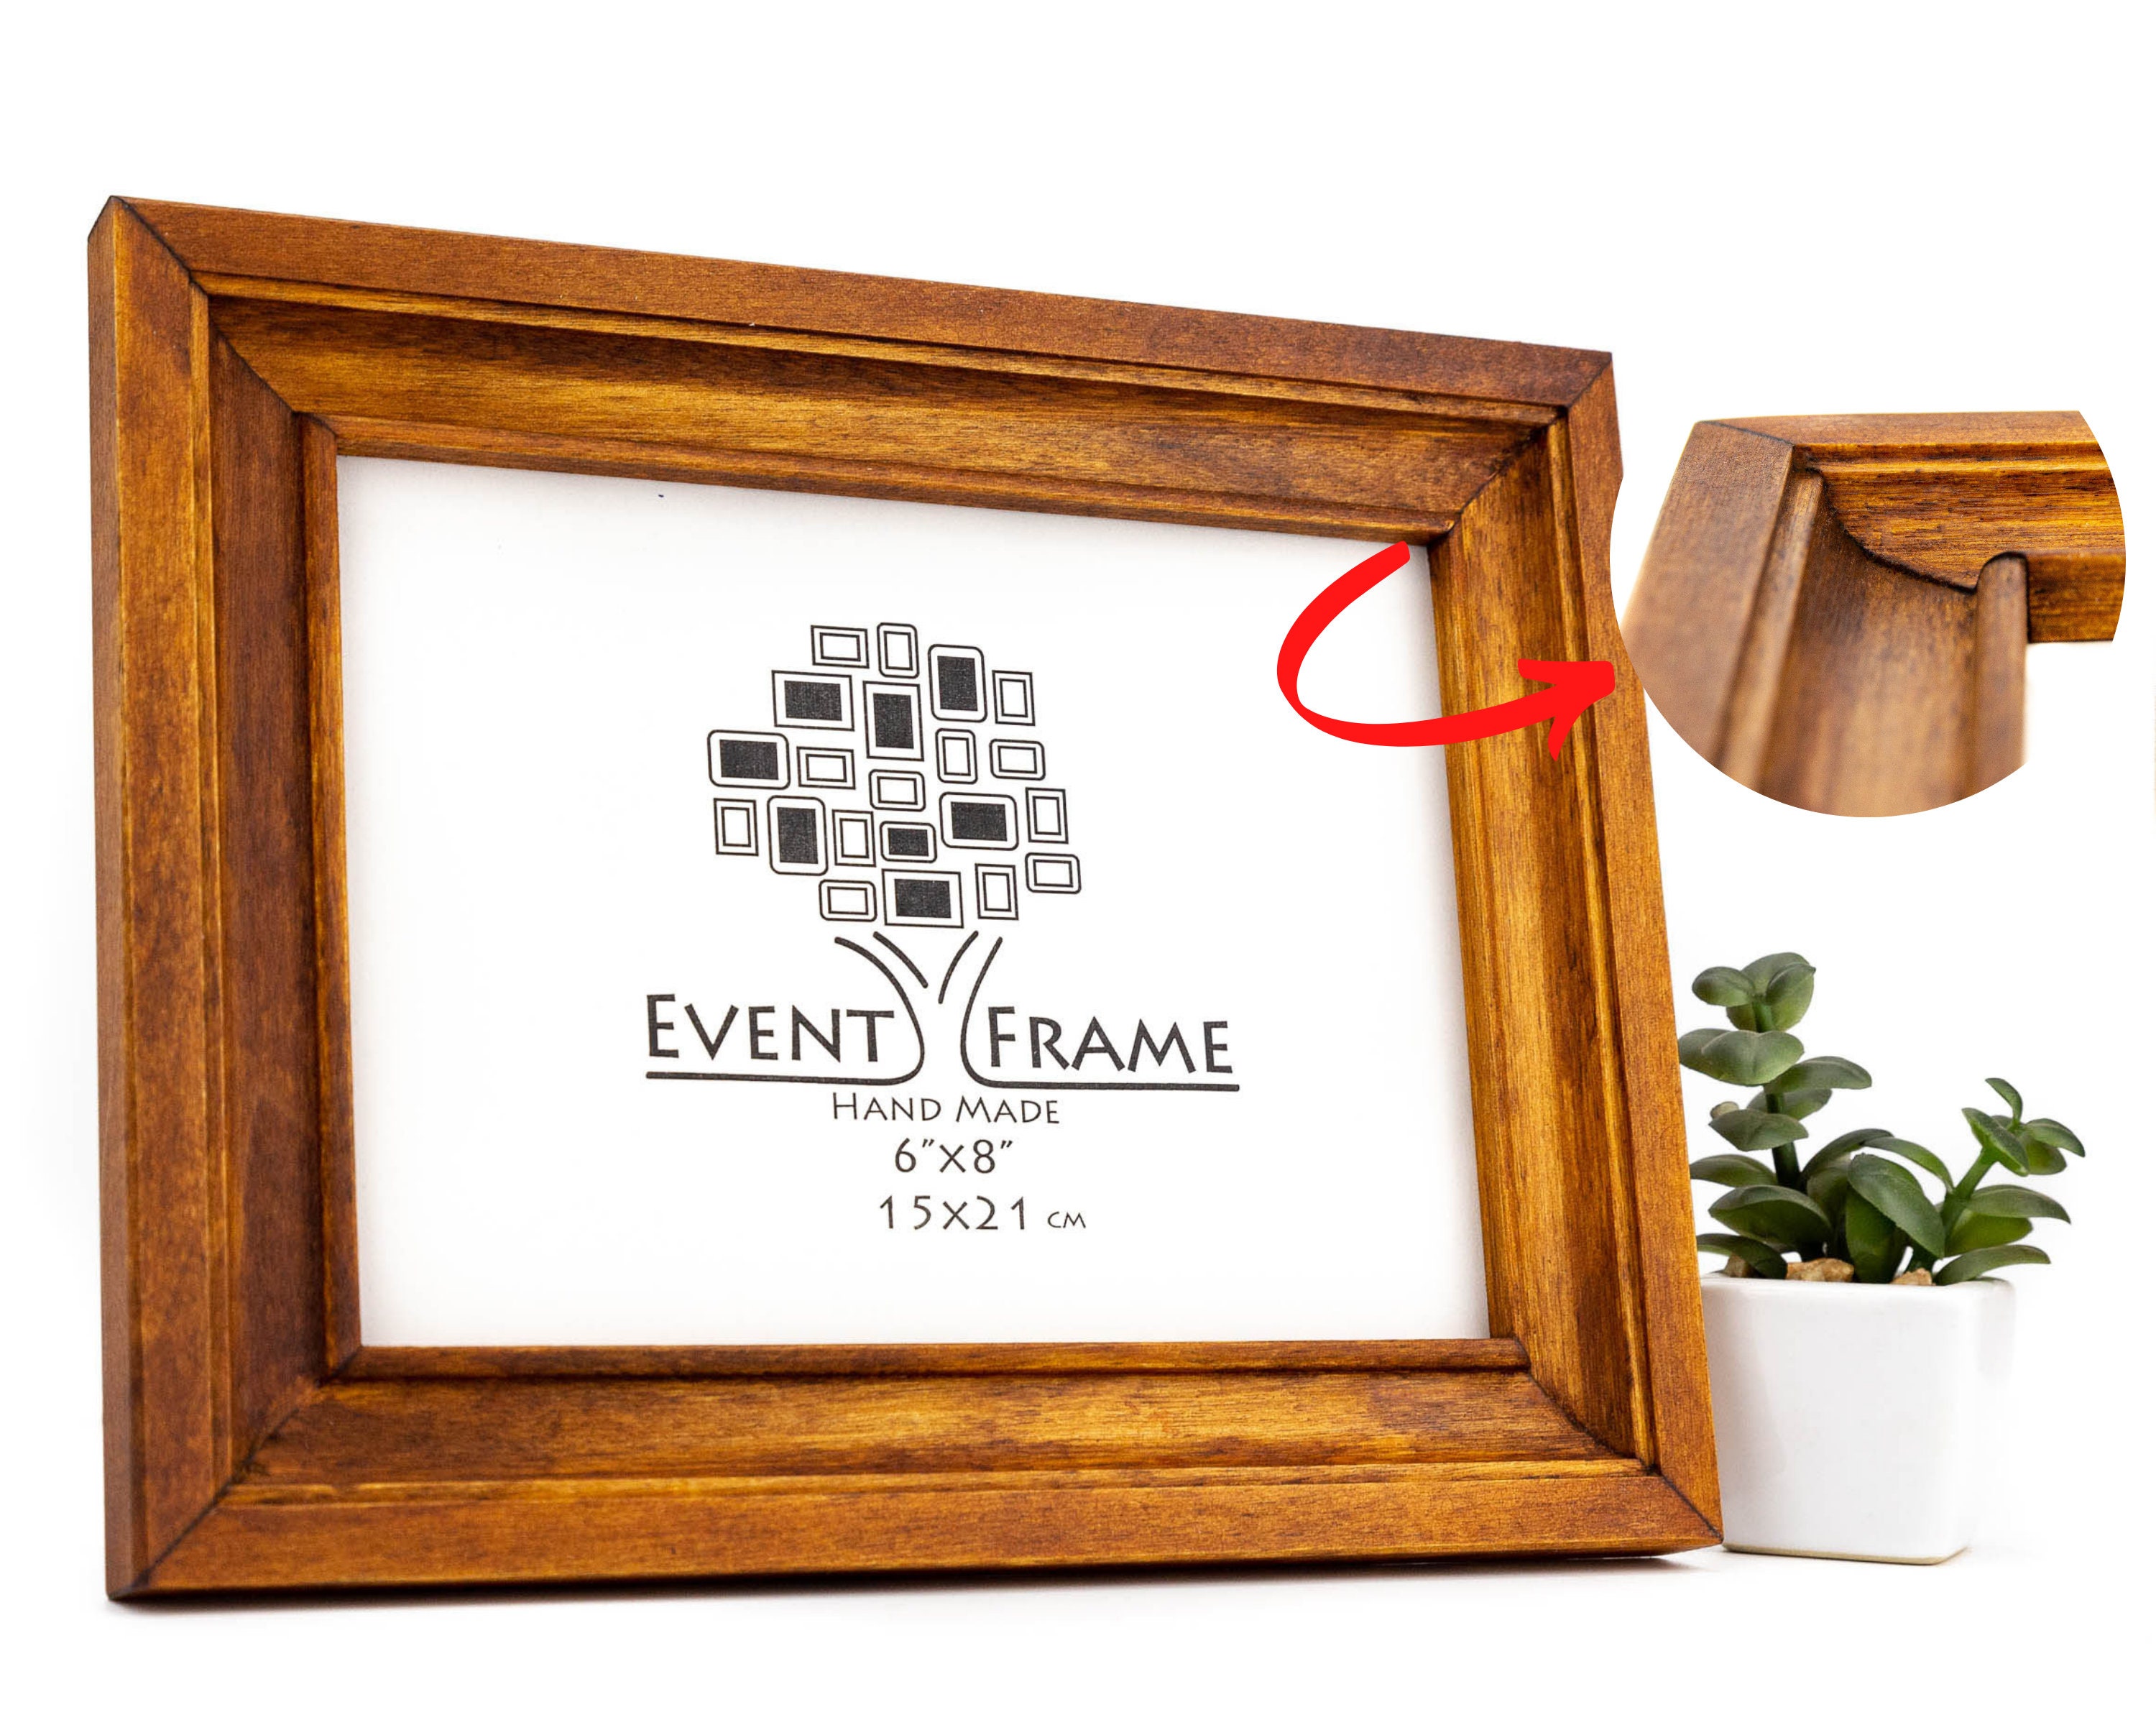 Handmade Rustic Wooden Picture Frames, Custom Size Photo Frames 1 